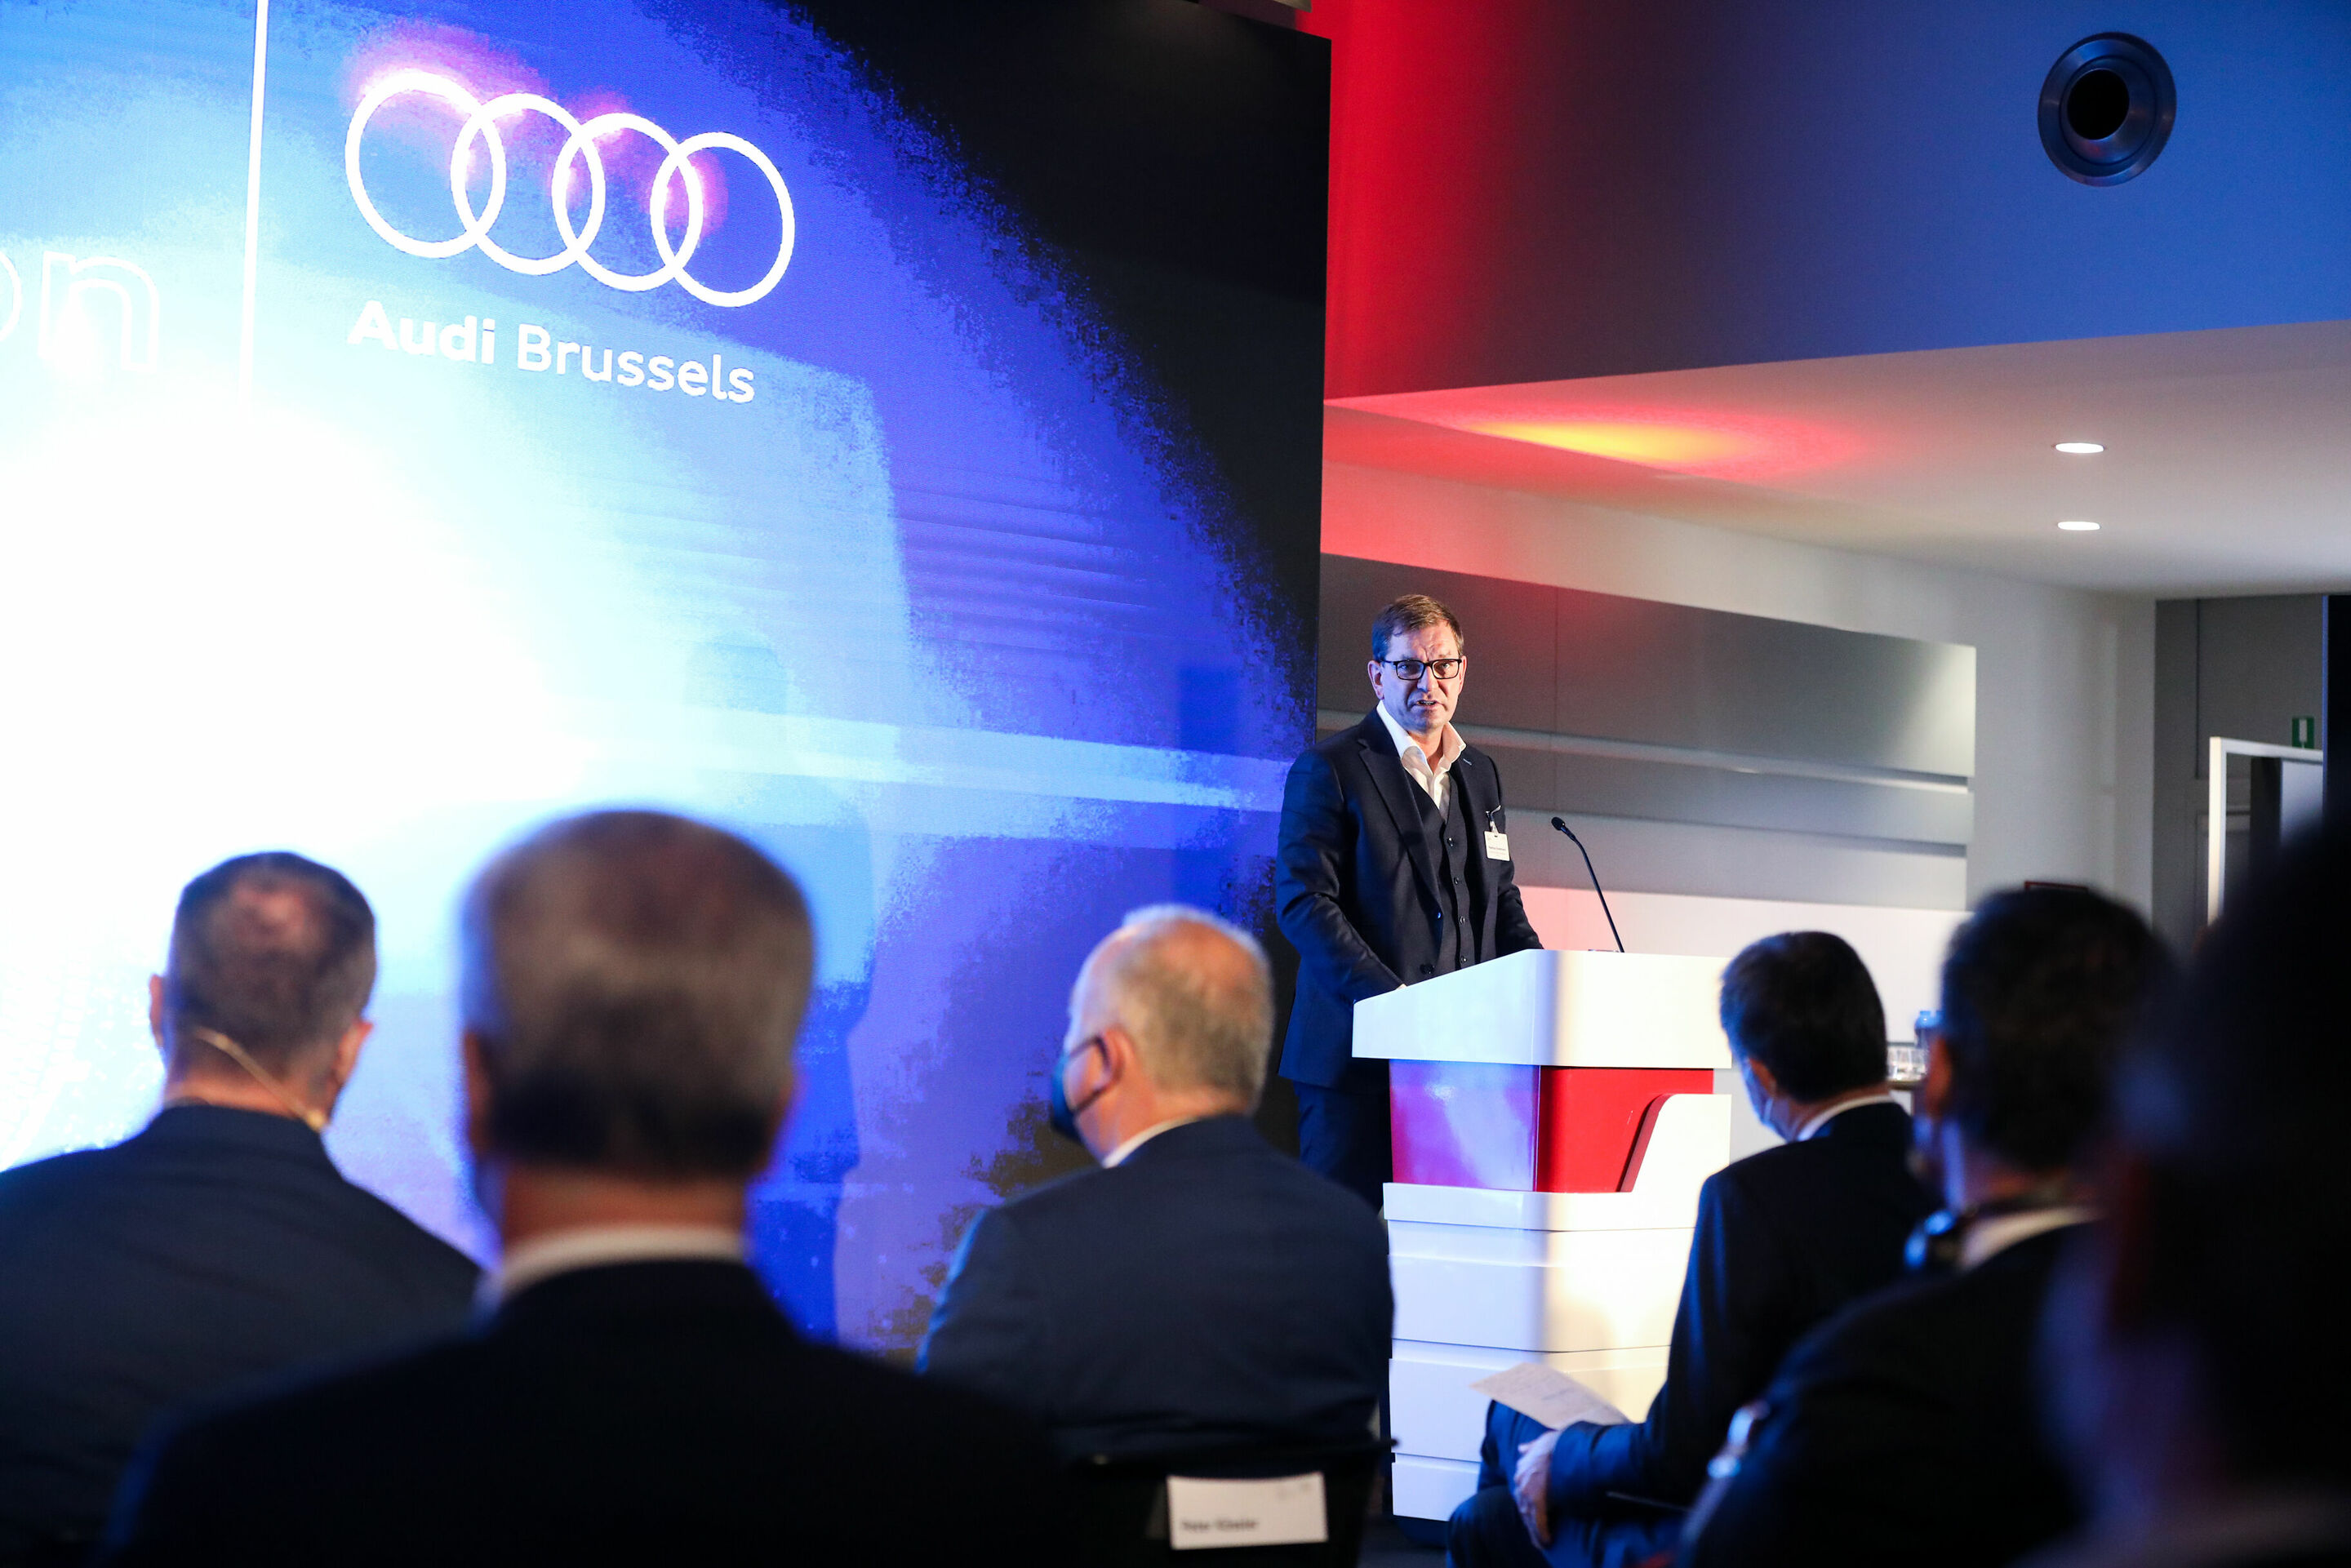 A pioneer in electric mobility and sustainability: Audi Brussels produces its eight millionth car